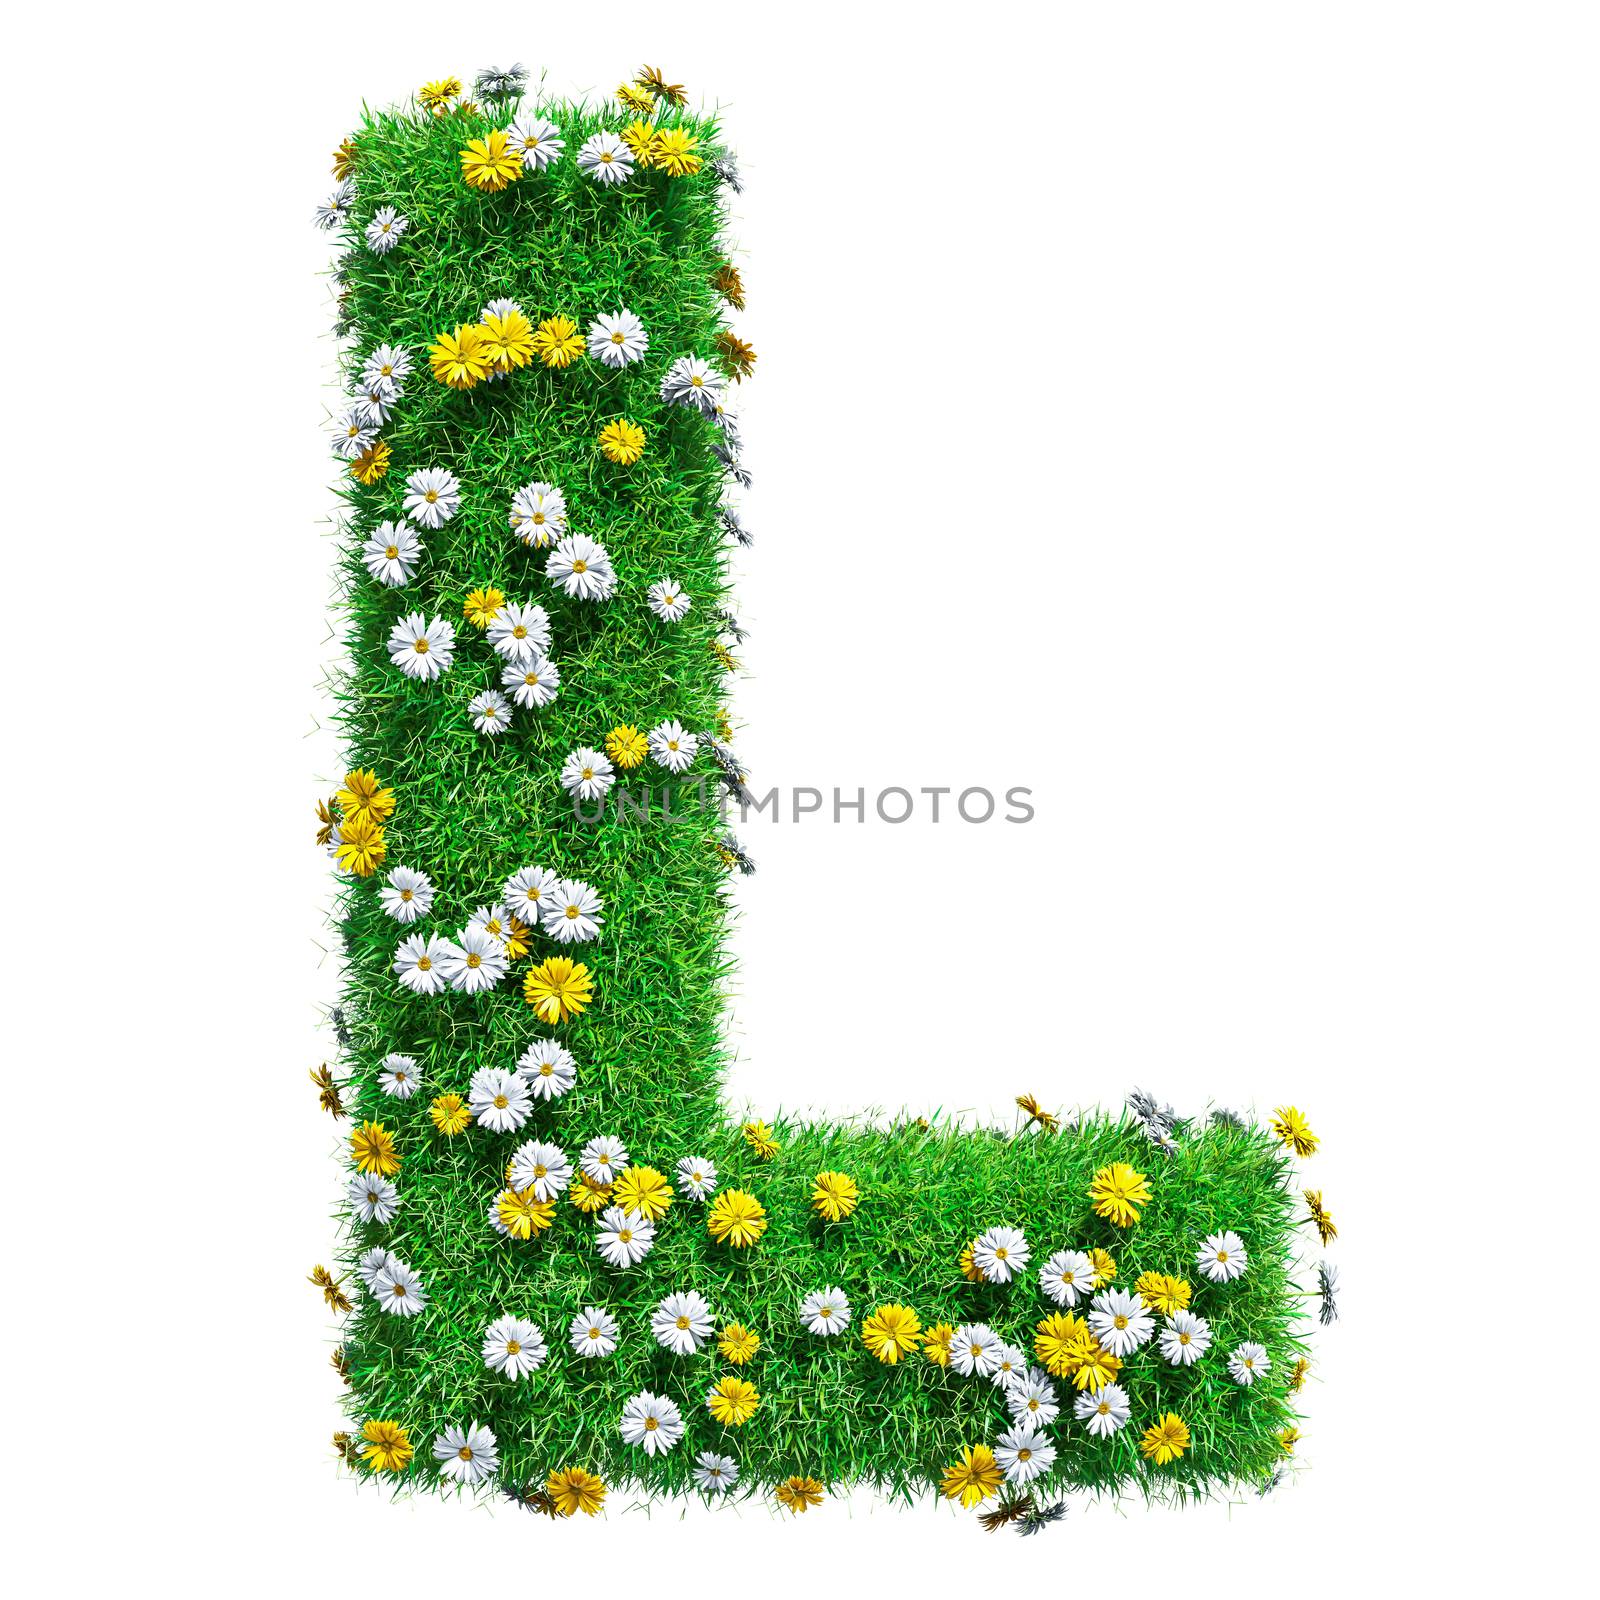 Letter L Of Green Grass And Flowers. Isolated On White Background. Font For Your Design. 3D Illustration